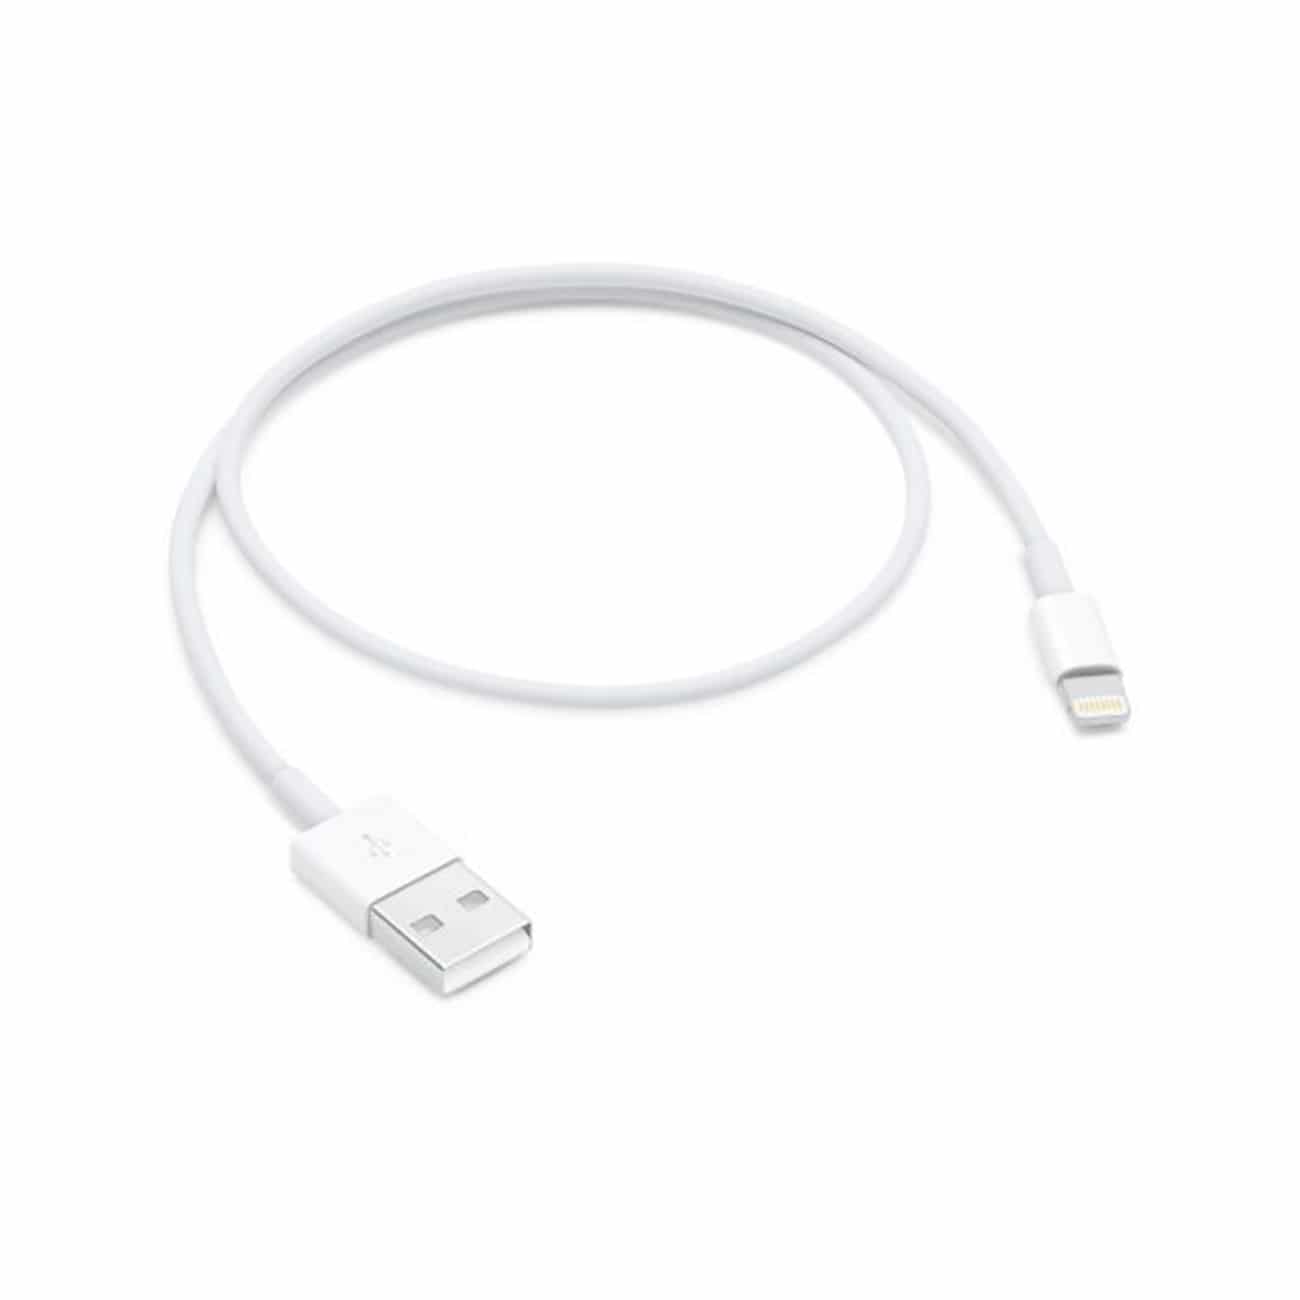 Lightning to USB cable